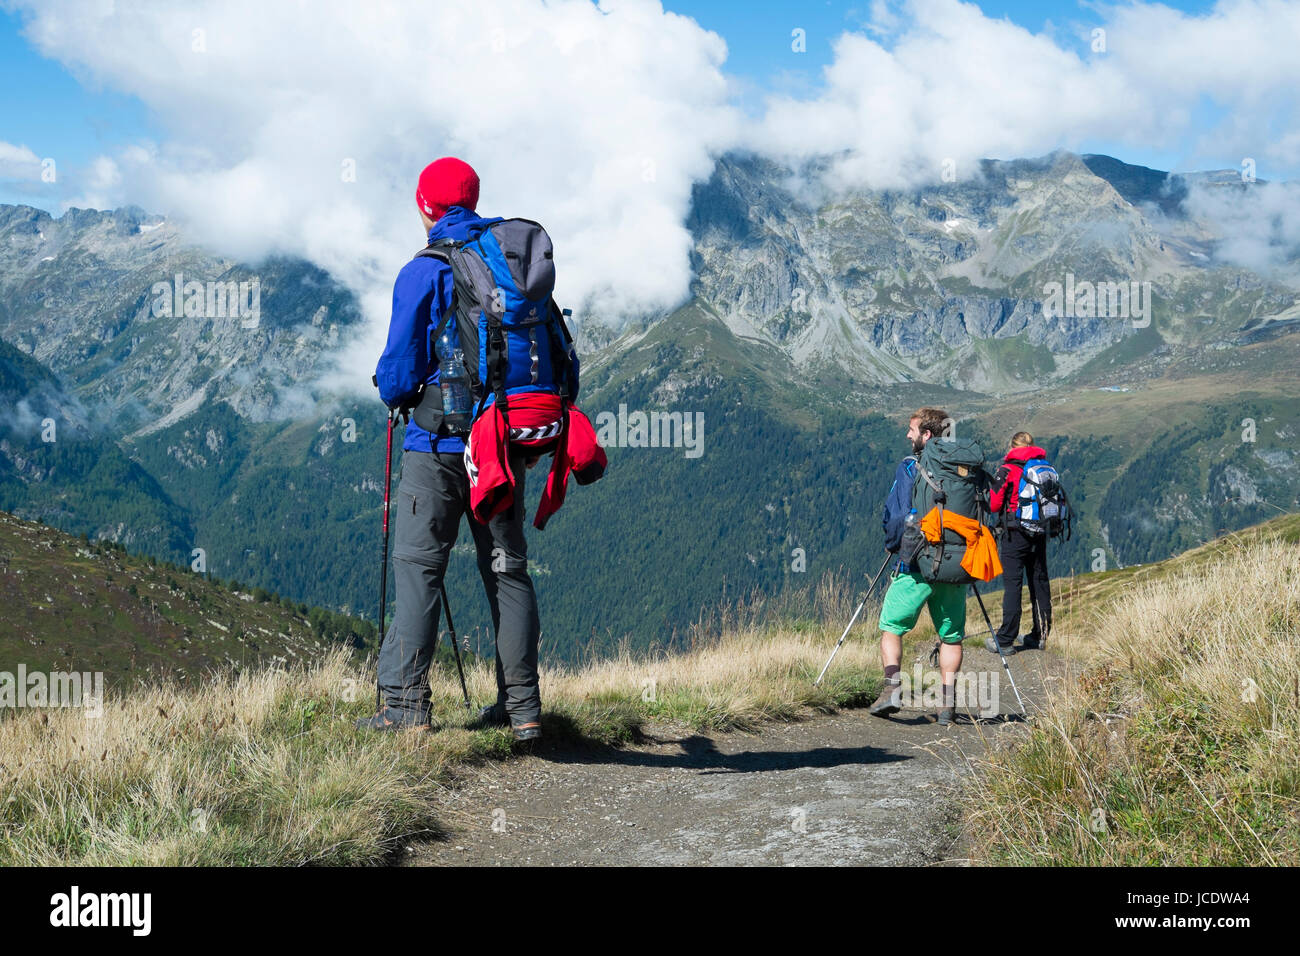 COL DE BALME, FRANCE - SEPTEMBER 01: Backpackers looking at view with Aiguille de Loriaz in the background. The area is a stage of the popular Mont Blanc tour. September 01, 2014 in Col de Balme. Stock Photo